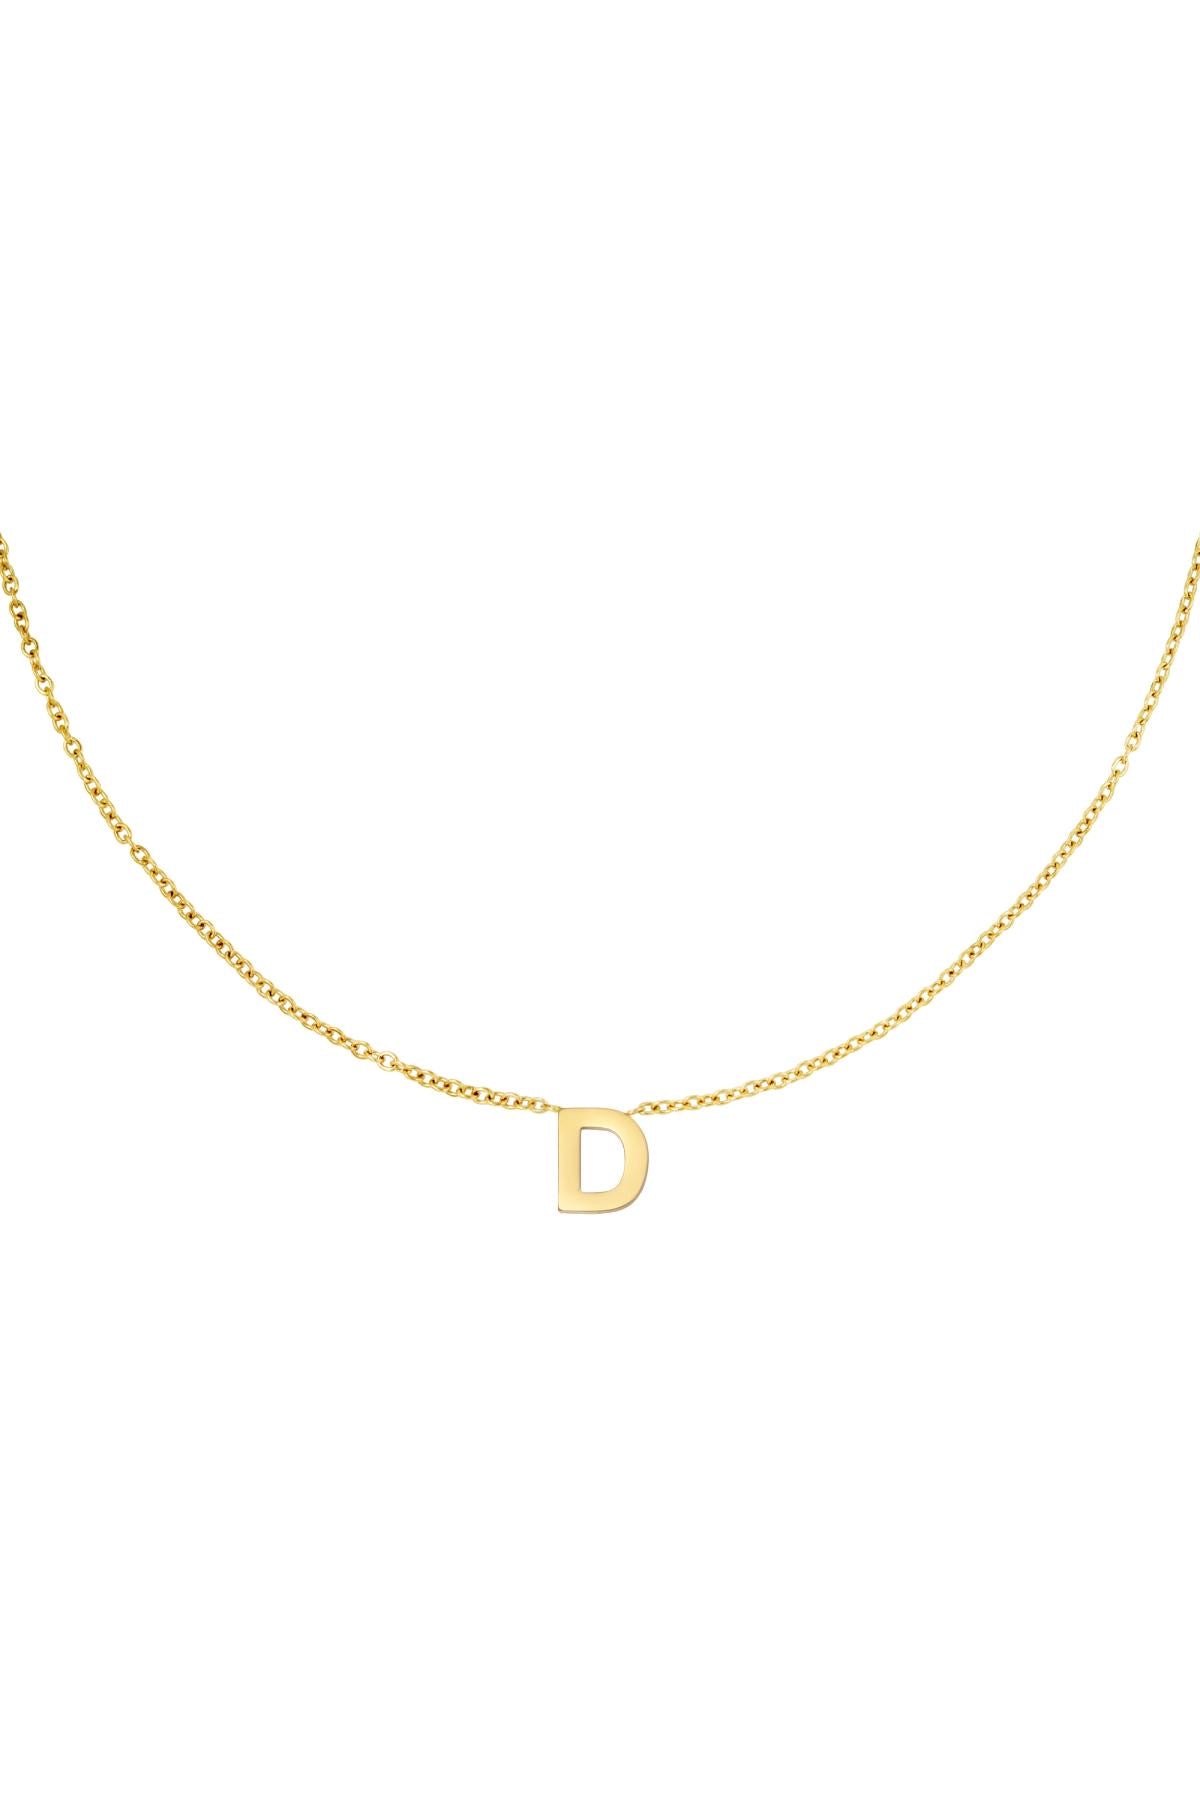 Initial Necklaces - Gold